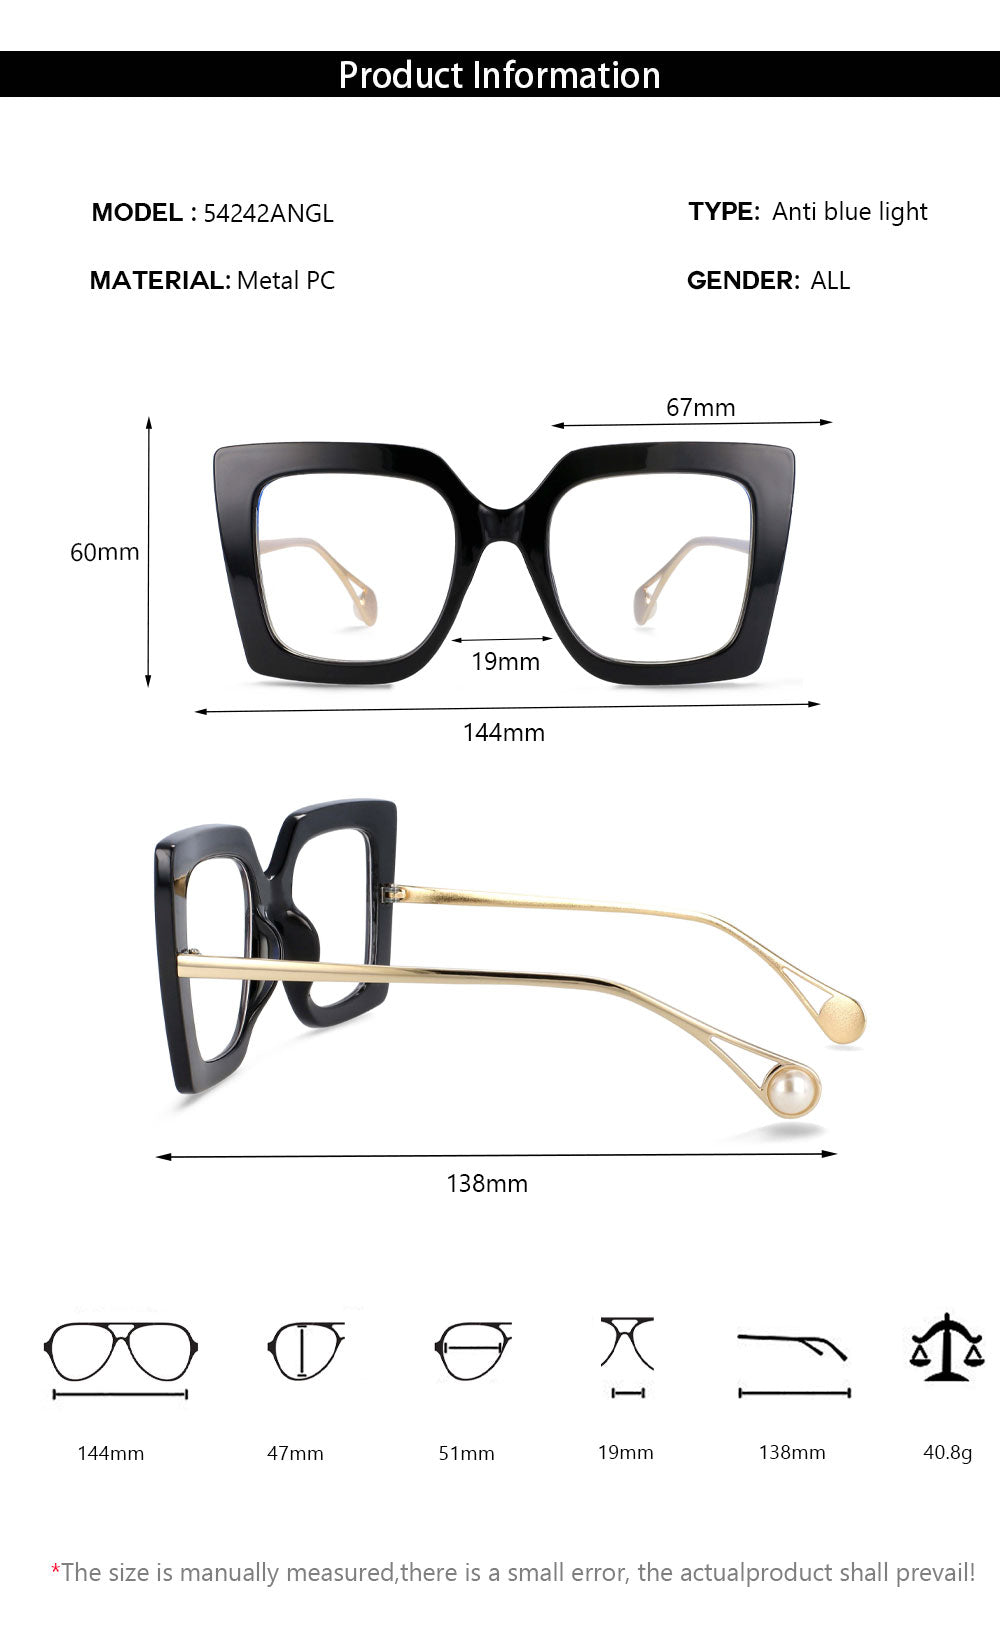 CCSpace Women's Oversized Square Cat Eye Resin Alloy Frame Eyeglasses 54242 Frame CCspace   